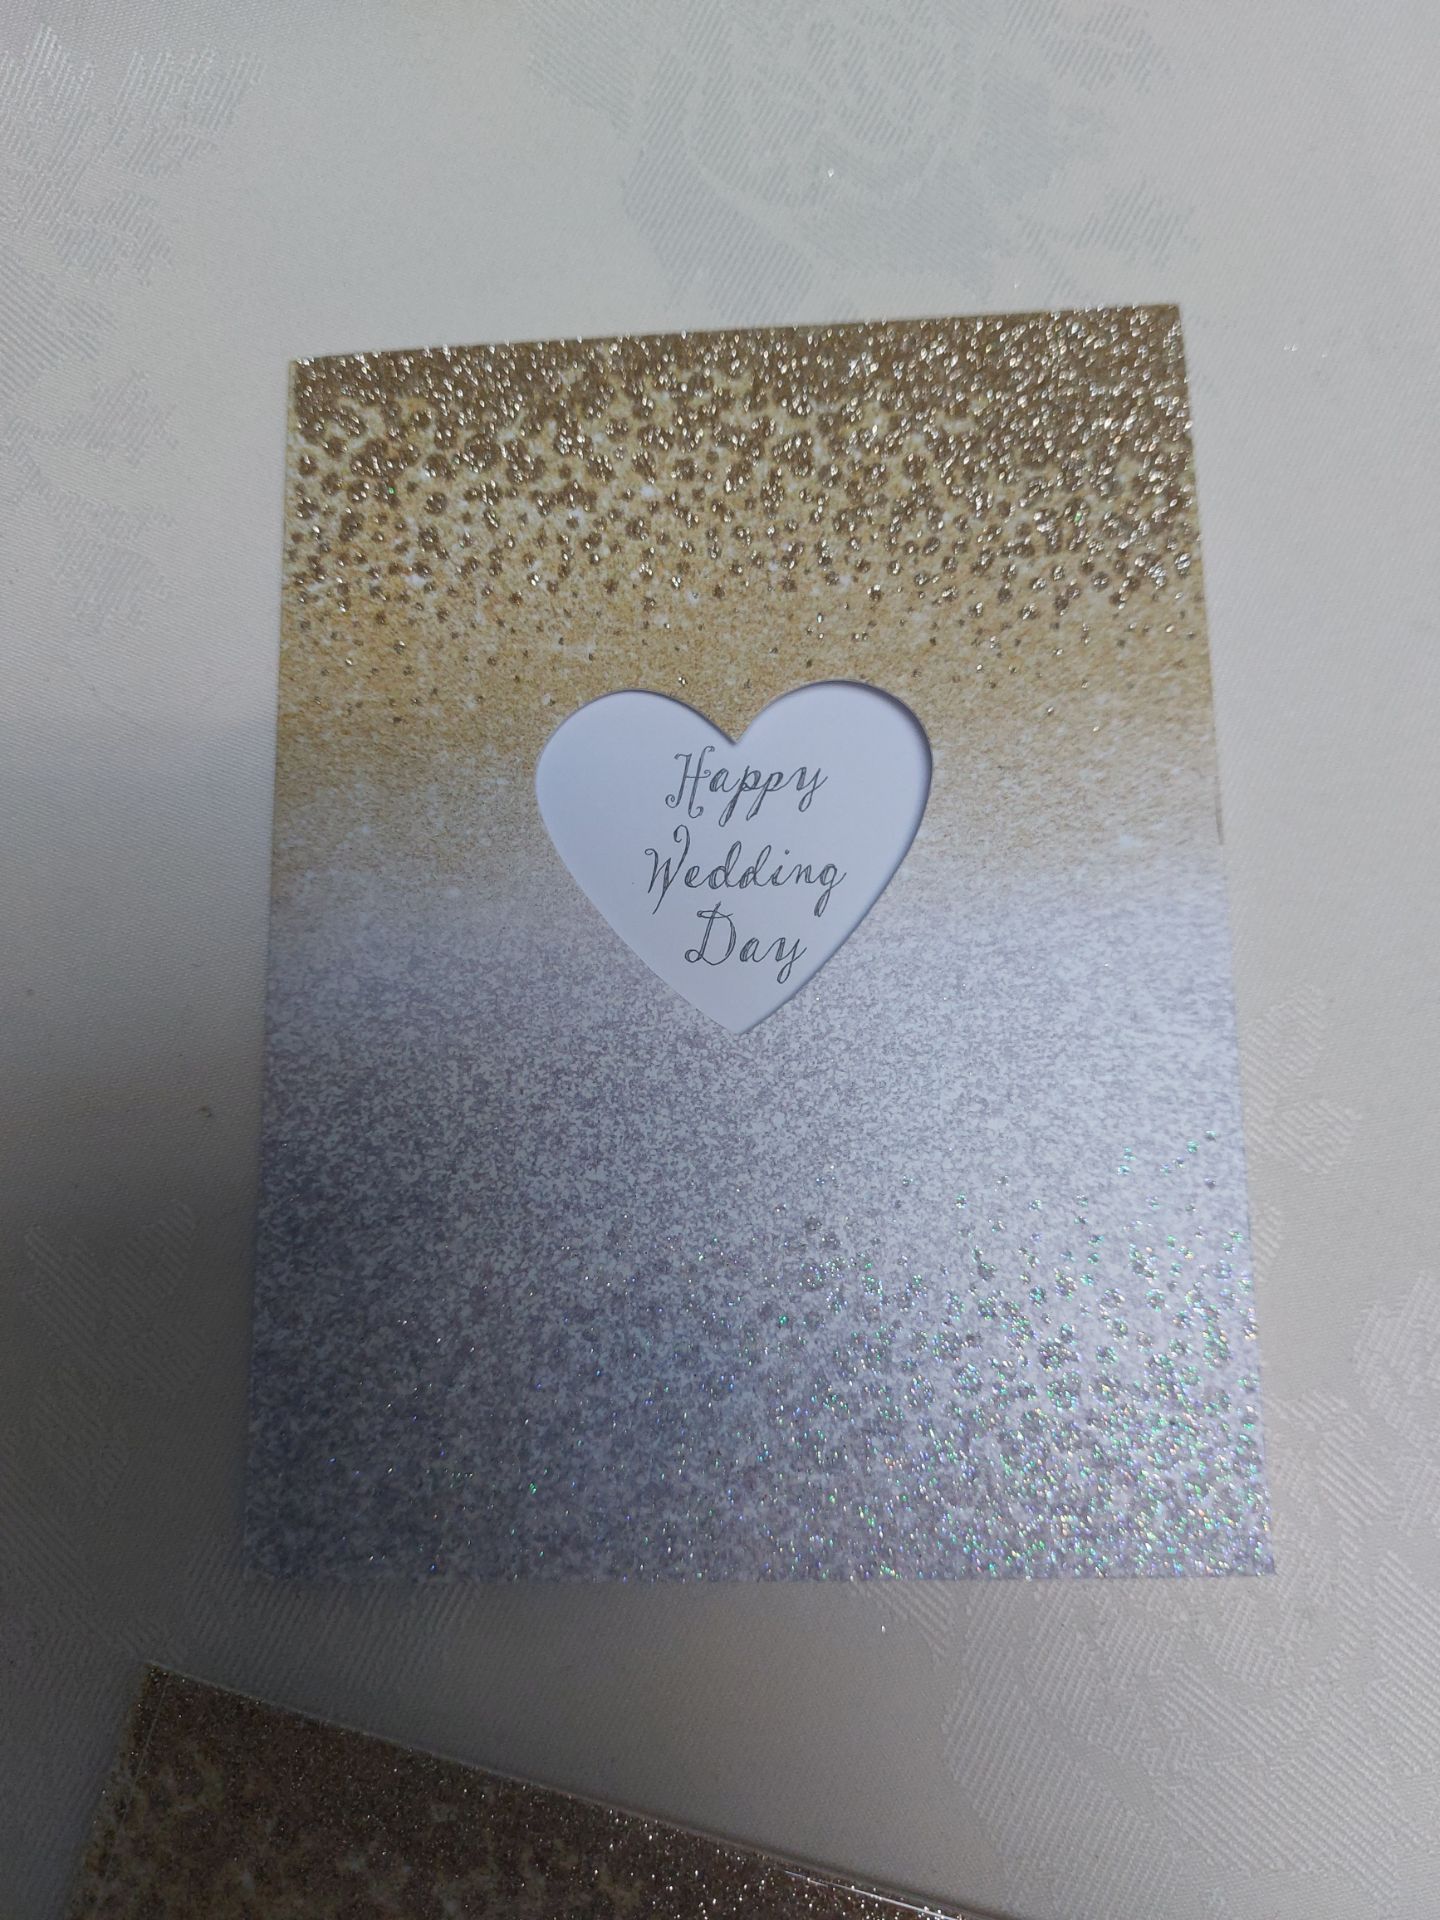 Wedding Cards - Box of 48 £3.00 RRP each, from Paperchase